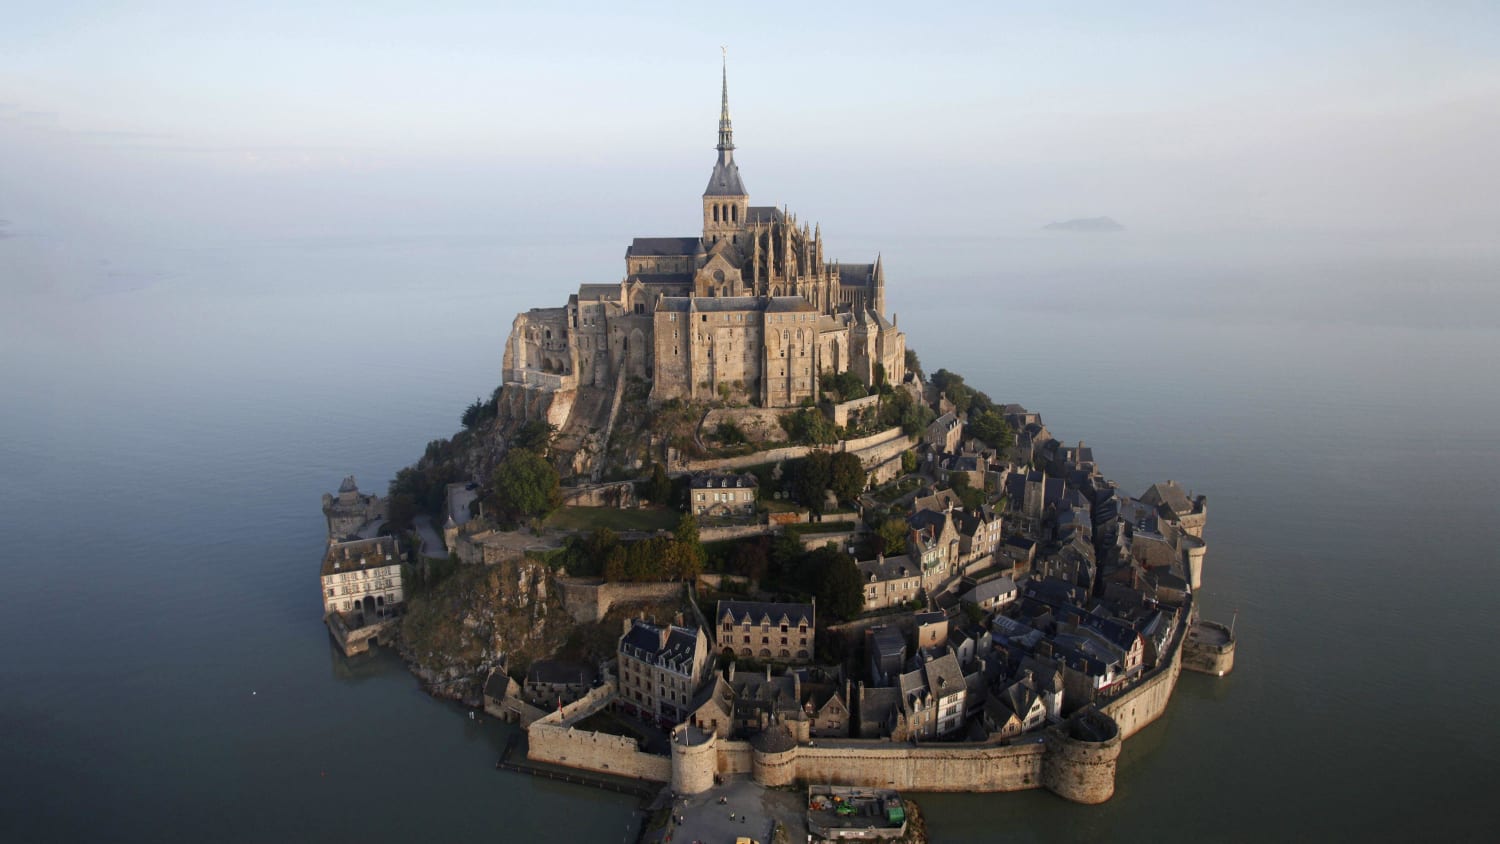 The Mont-Saint-Michel in France